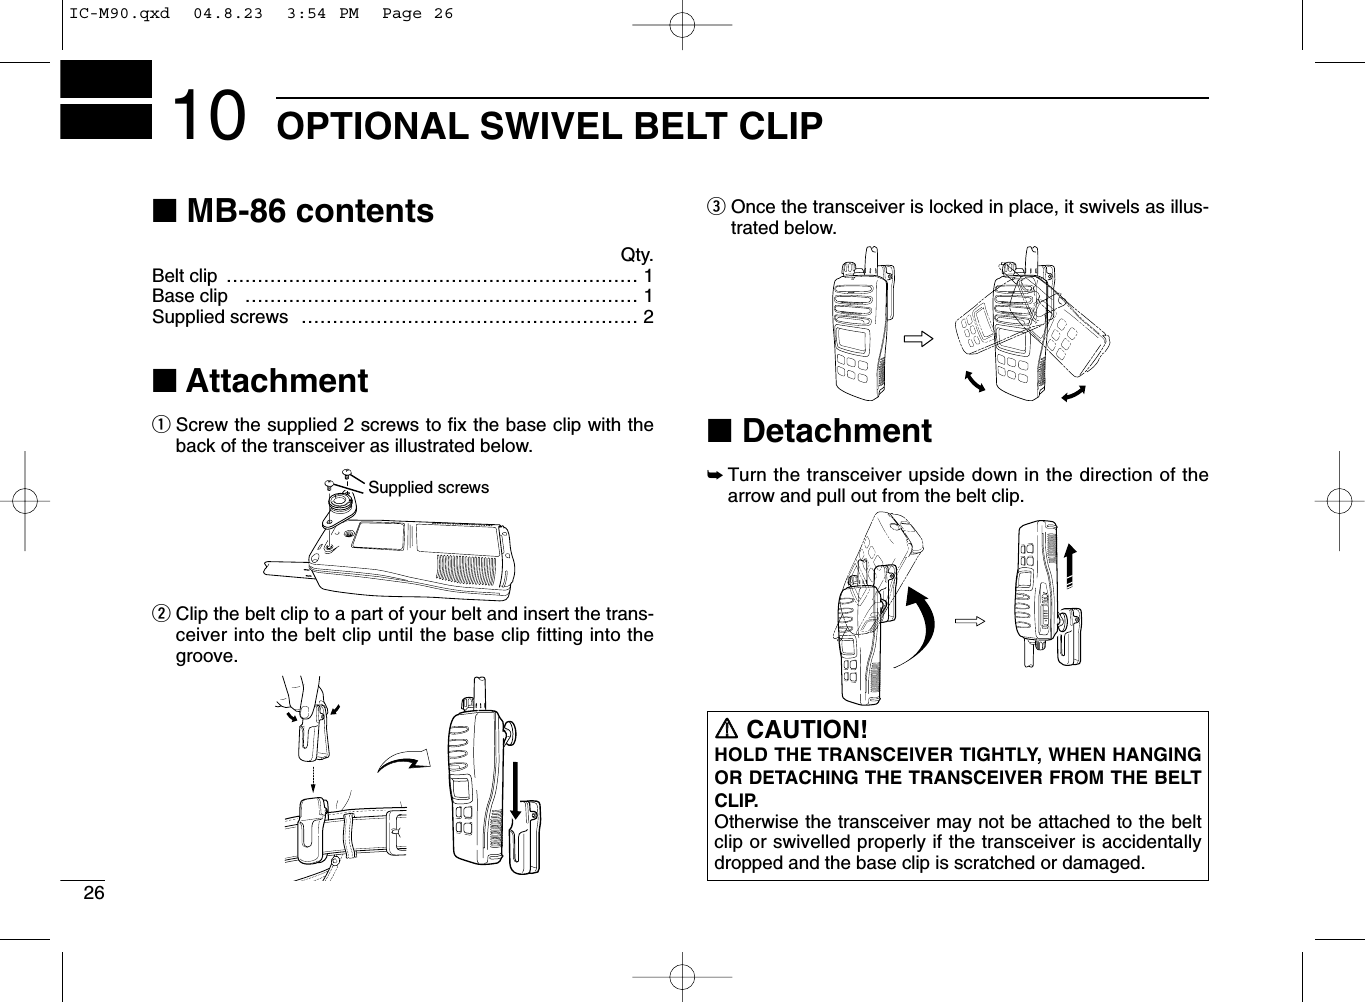 26OPTIONAL SWIVEL BELT CLIP10■MB-86 contentsQty.Belt clip ………………………………………………………… 1Base clip ……………………………………………………… 1Supplied screws ……………………………………………… 2■AttachmentqScrew the supplied 2 screws to ﬁx the base clip with theback of the transceiver as illustrated below.wClip the belt clip to a part of your belt and insert the trans-ceiver into the belt clip until the base clip fitting into thegroove.eOnce the transceiver is locked in place, it swivels as illus-trated below.■Detachment➥Turn the transceiver upside down in the direction of thearrow and pull out from the belt clip.Supplied screwsPTTSQLMONIRRCAUTION!HOLD THE TRANSCEIVER TIGHTLY, WHEN HANGINGOR DETACHING THE TRANSCEIVER FROM THE BELTCLIP.Otherwise the transceiver may not be attached to the beltclip or swivelled properly if the transceiver is accidentallydropped and the base clip is scratched or damaged.IC-M90.qxd  04.8.23  3:54 PM  Page 26